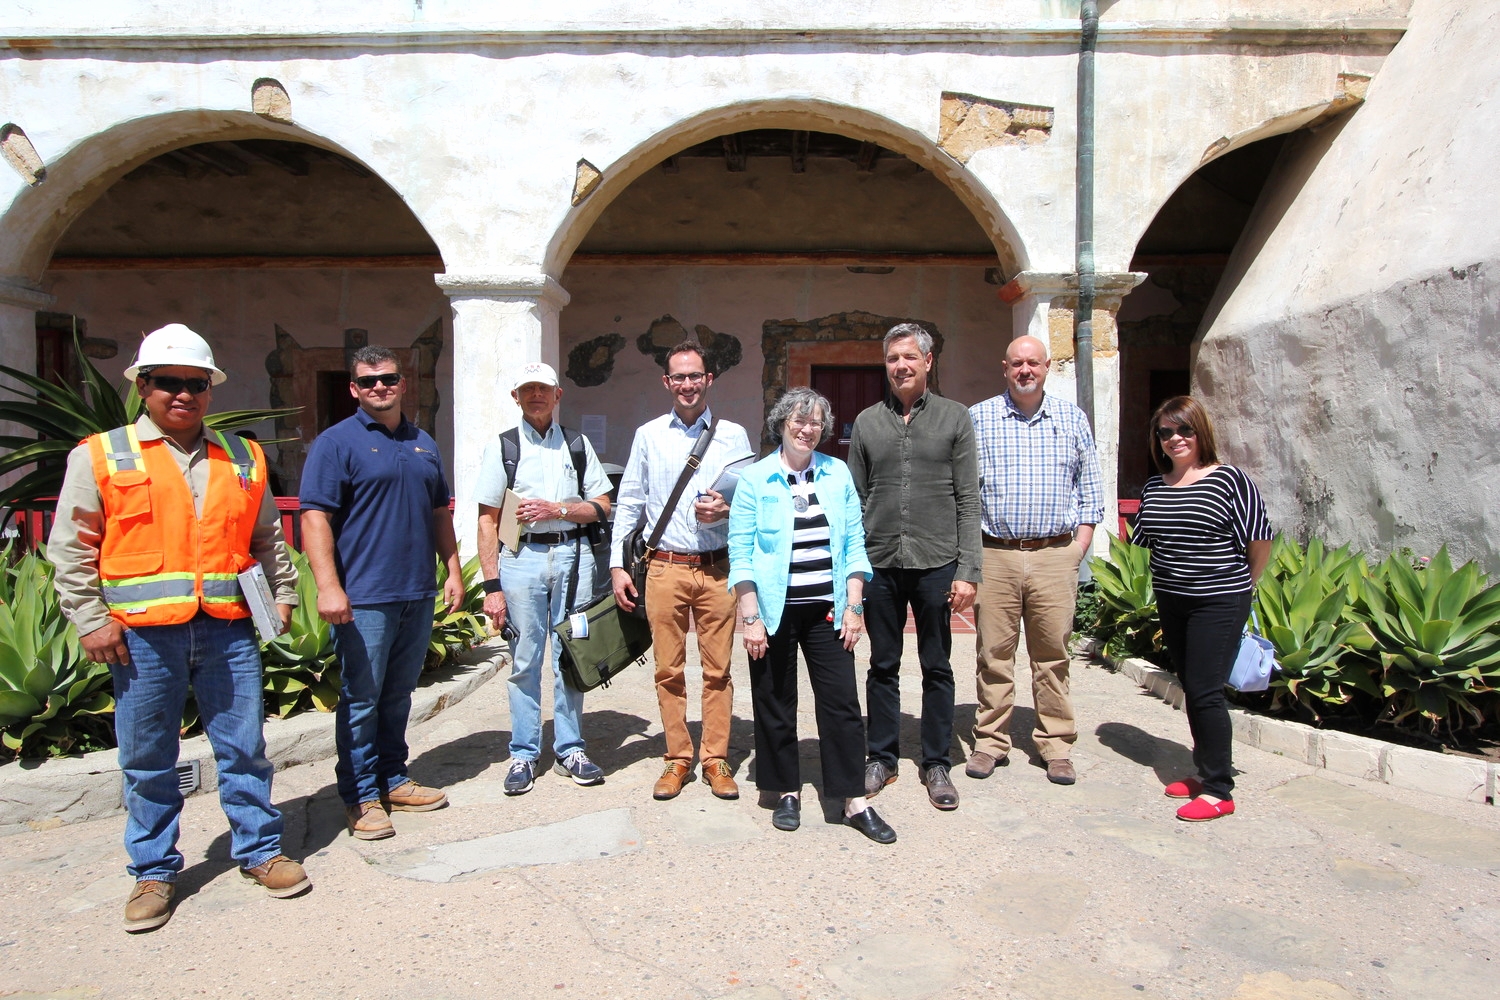  Project team members in front of the  convento  wing south elevation. &nbsp;From left: &nbsp;Napoleon Gallardo (Spectra), Troy Parry (Spectra), Nels Roselund (Roselund Engineering), Shane Swerdlow (Chattel), Tina Foss (Old Mission Santa Barbara), Jo